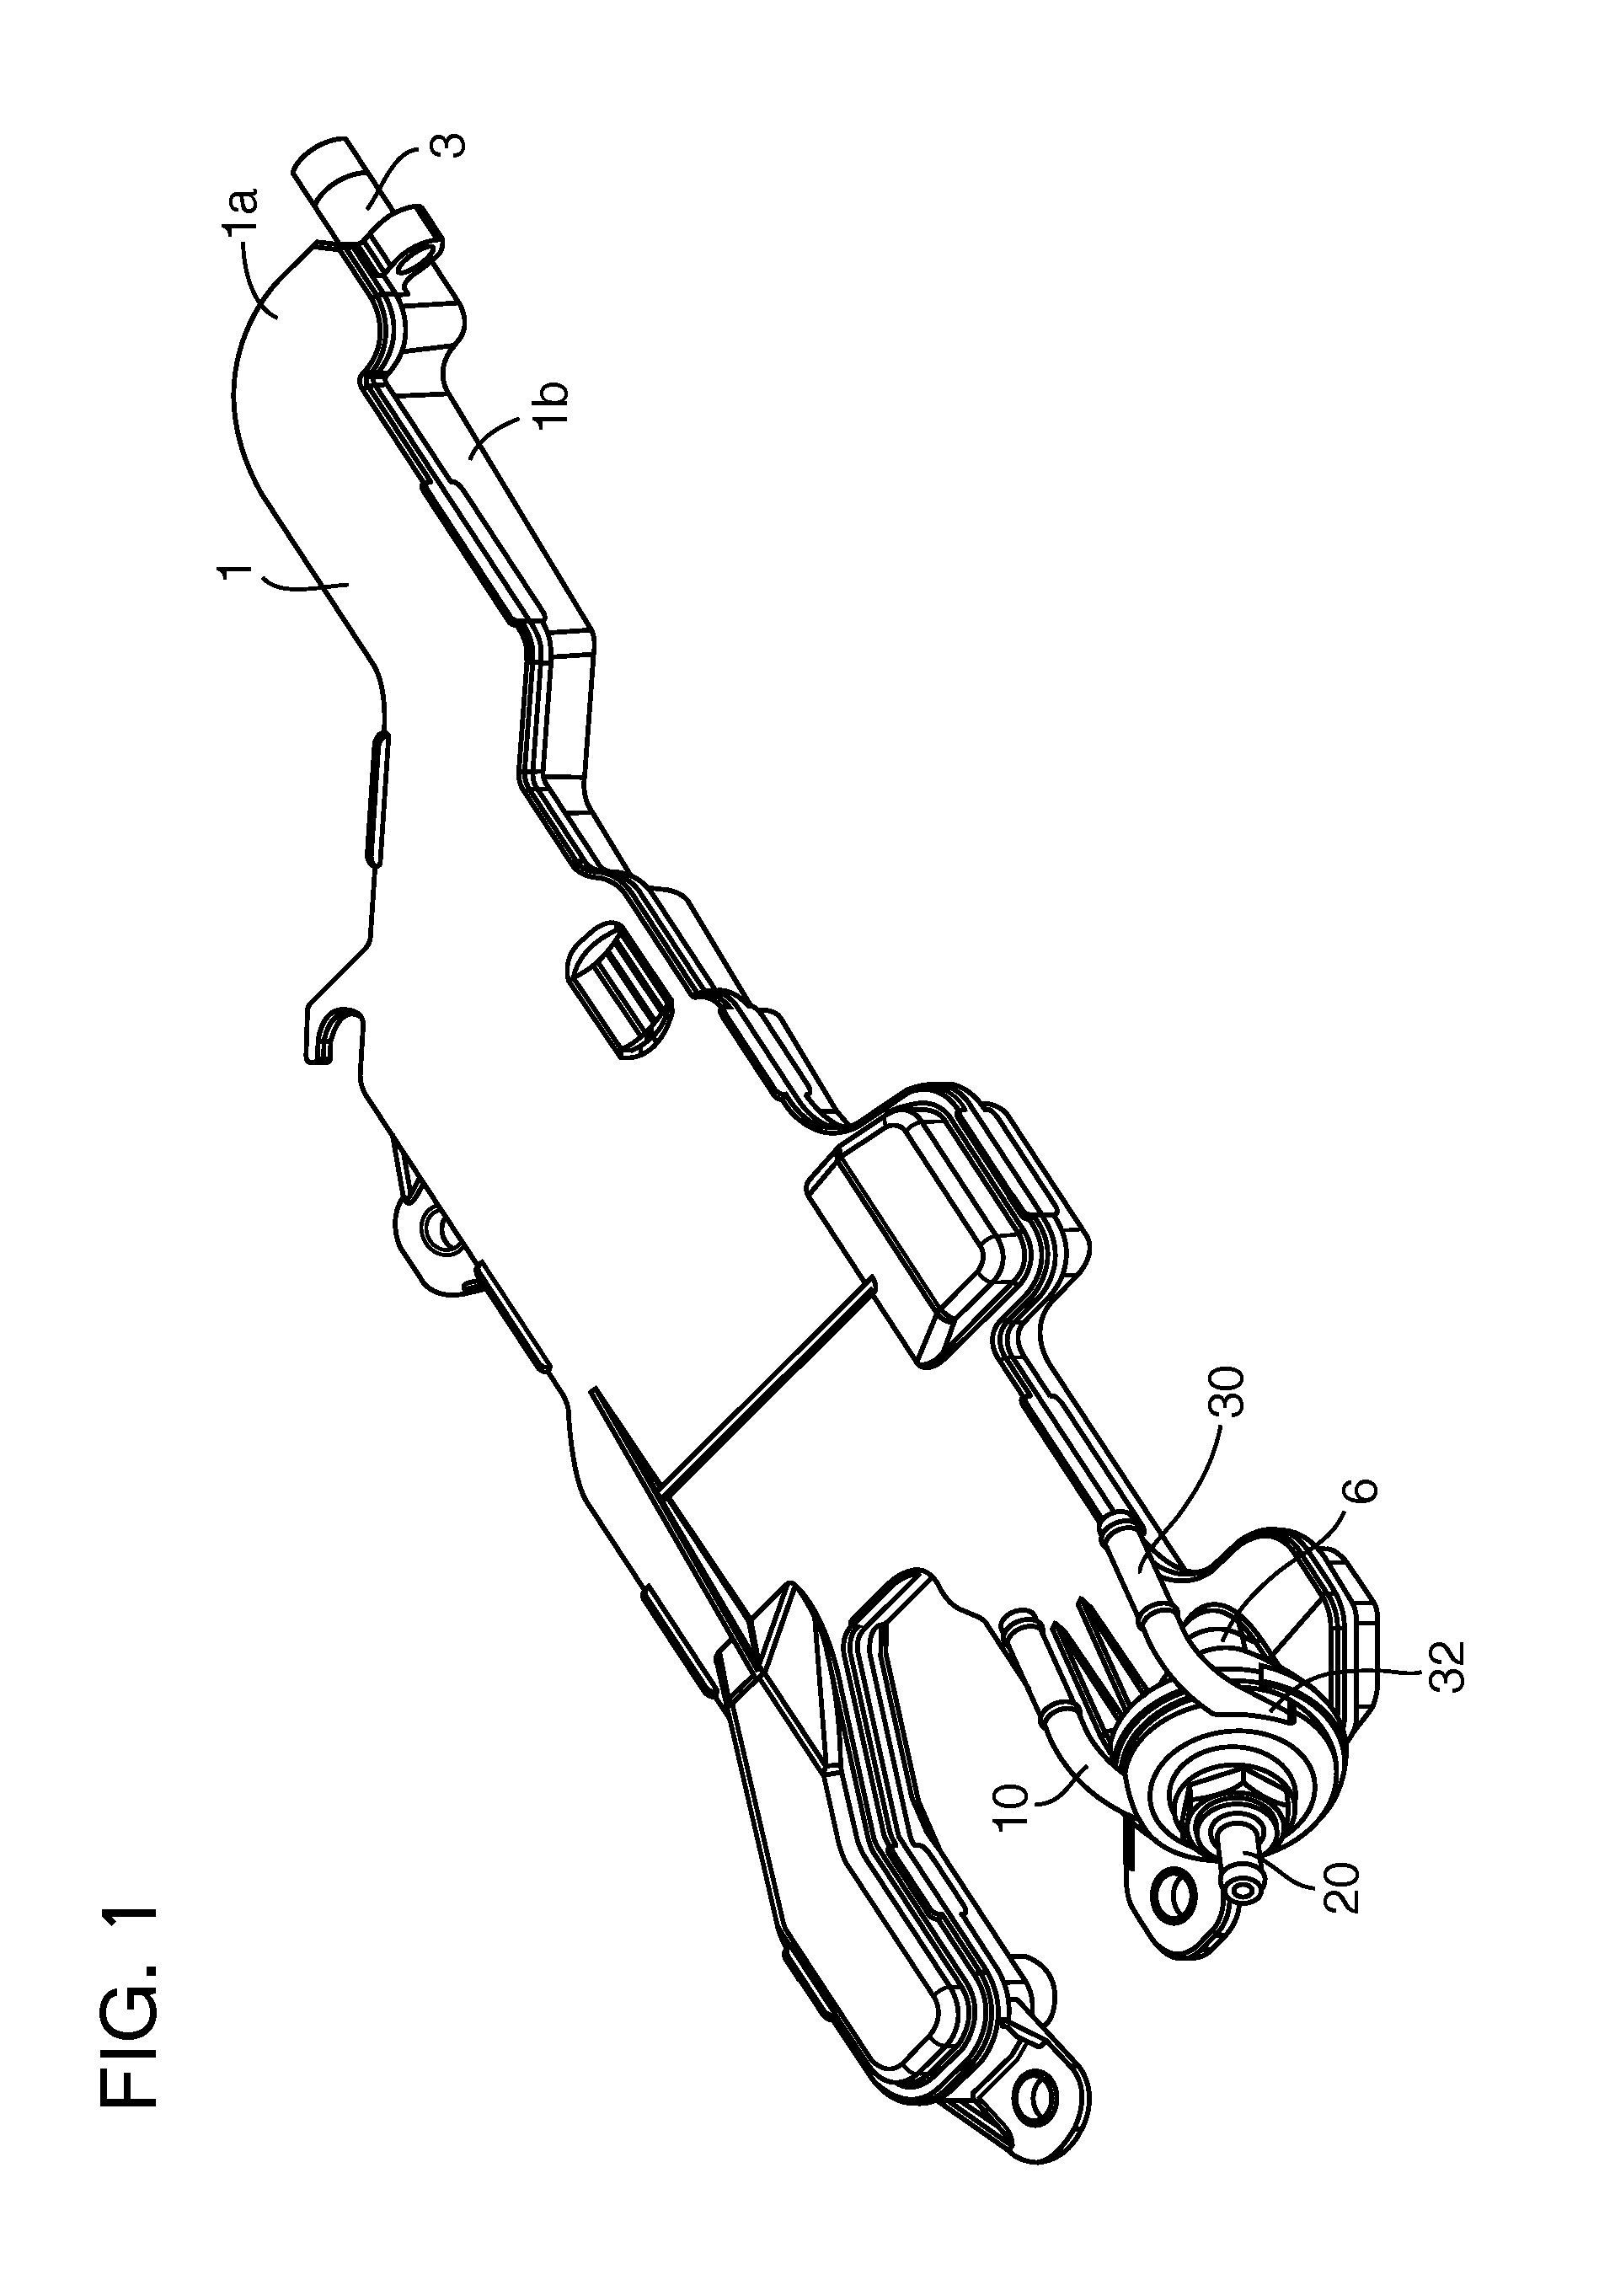 Heating device of a PCV valve